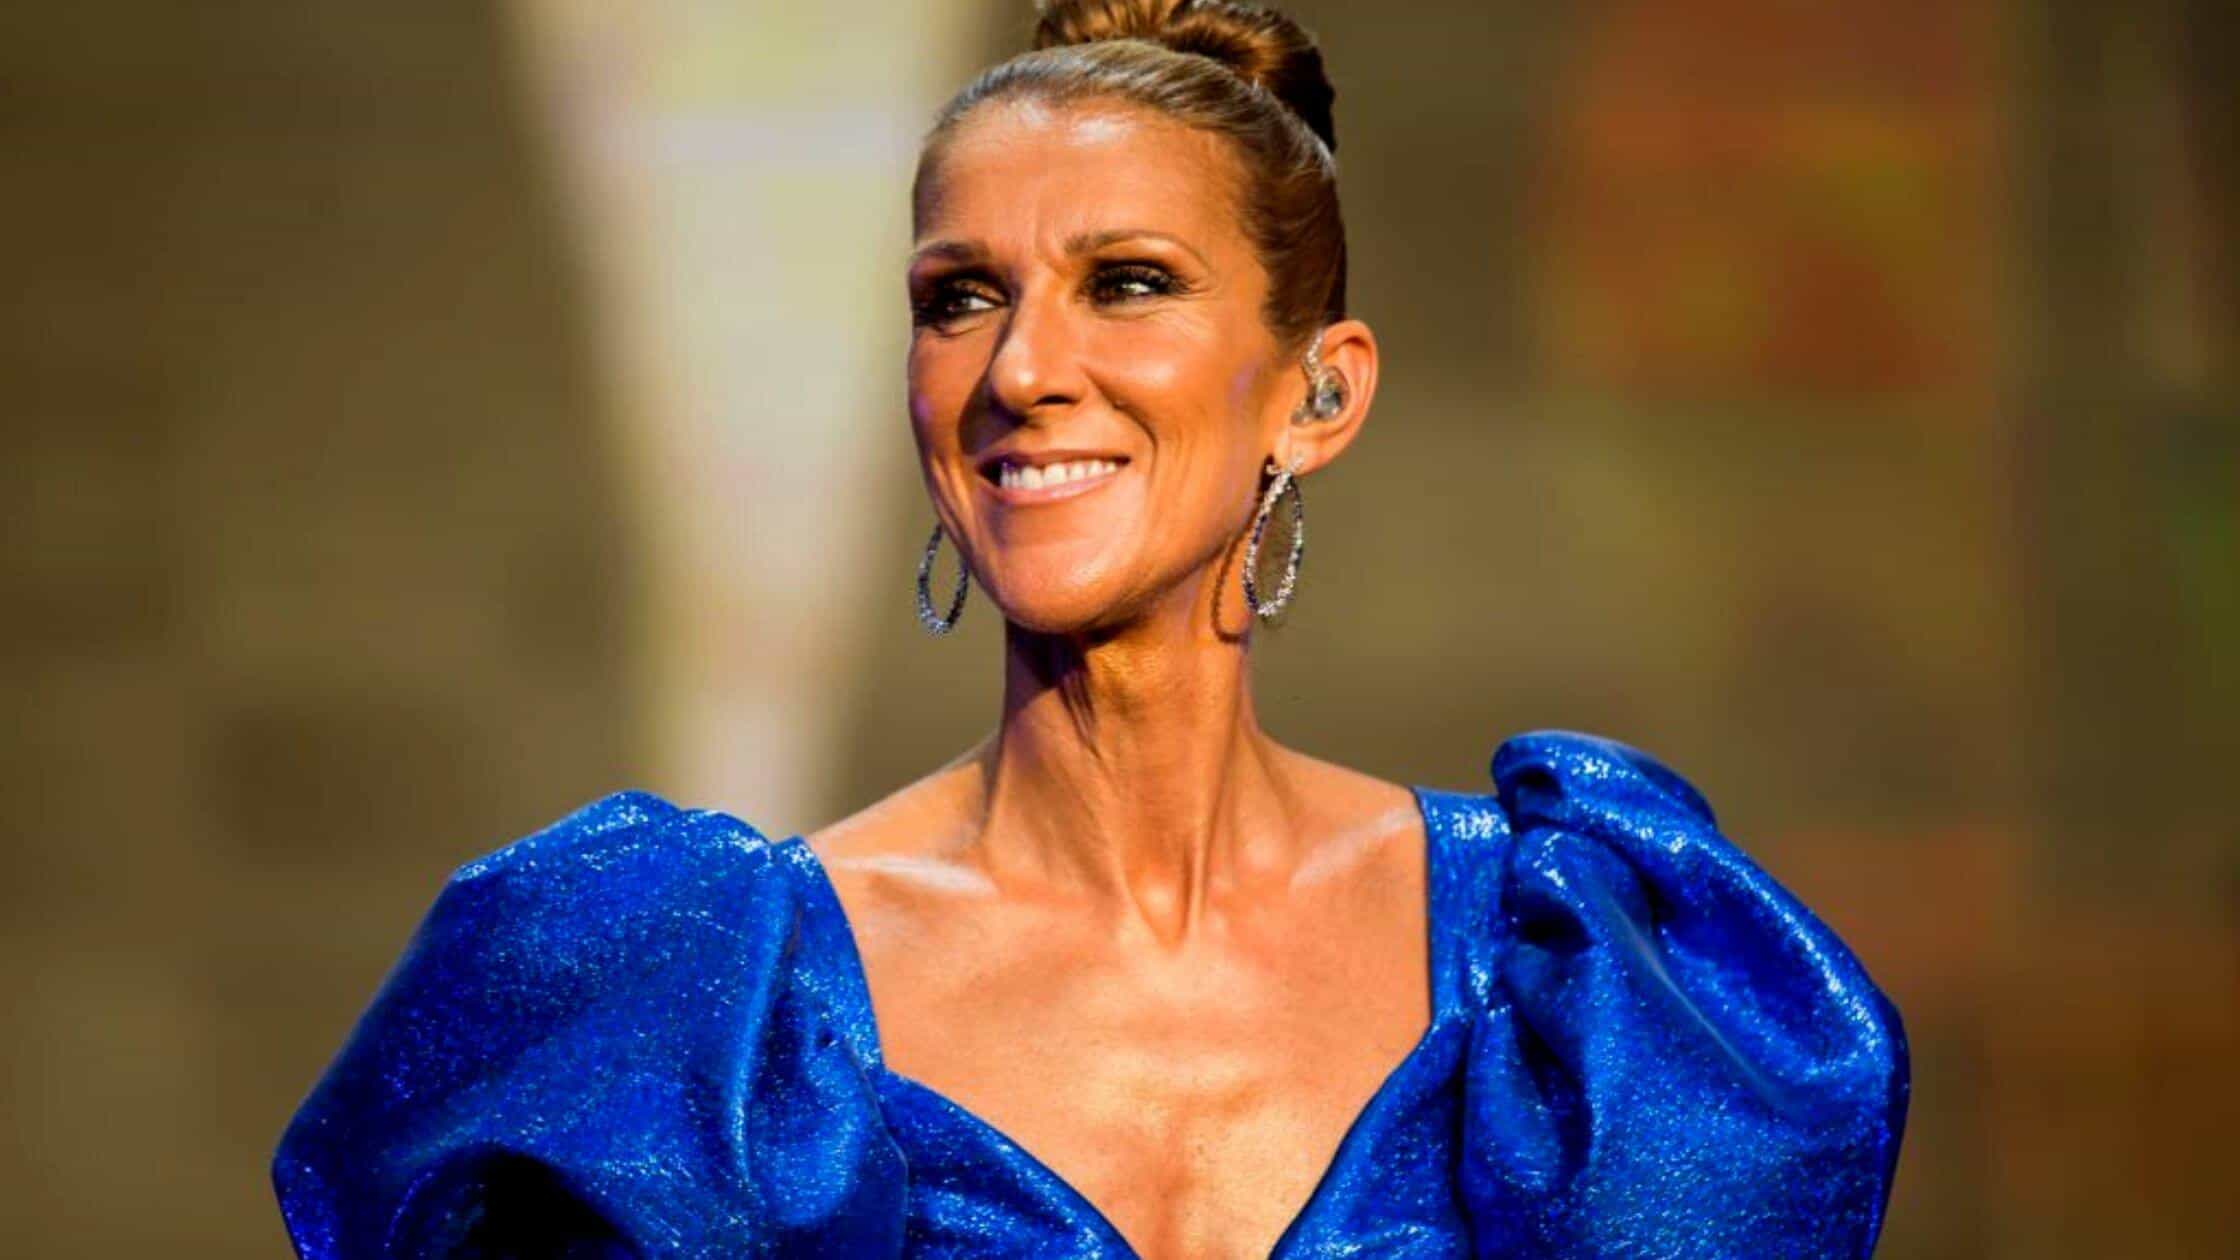 Celine Dion Revealed That She Has Stiff-Person Syndrome What Is It